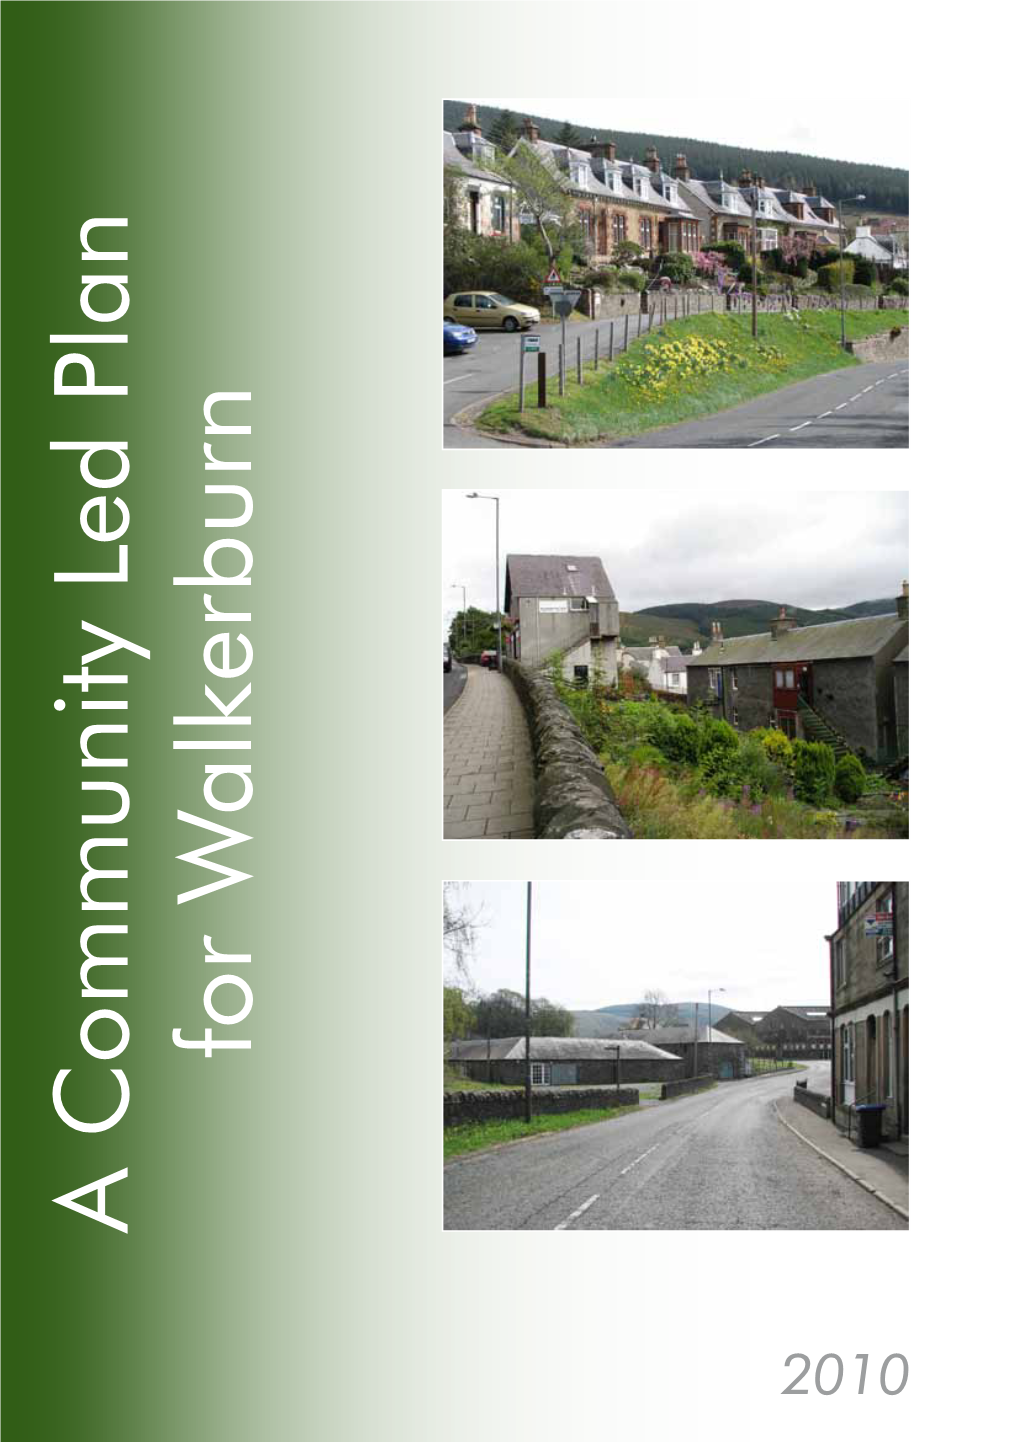 A Community Action Plan